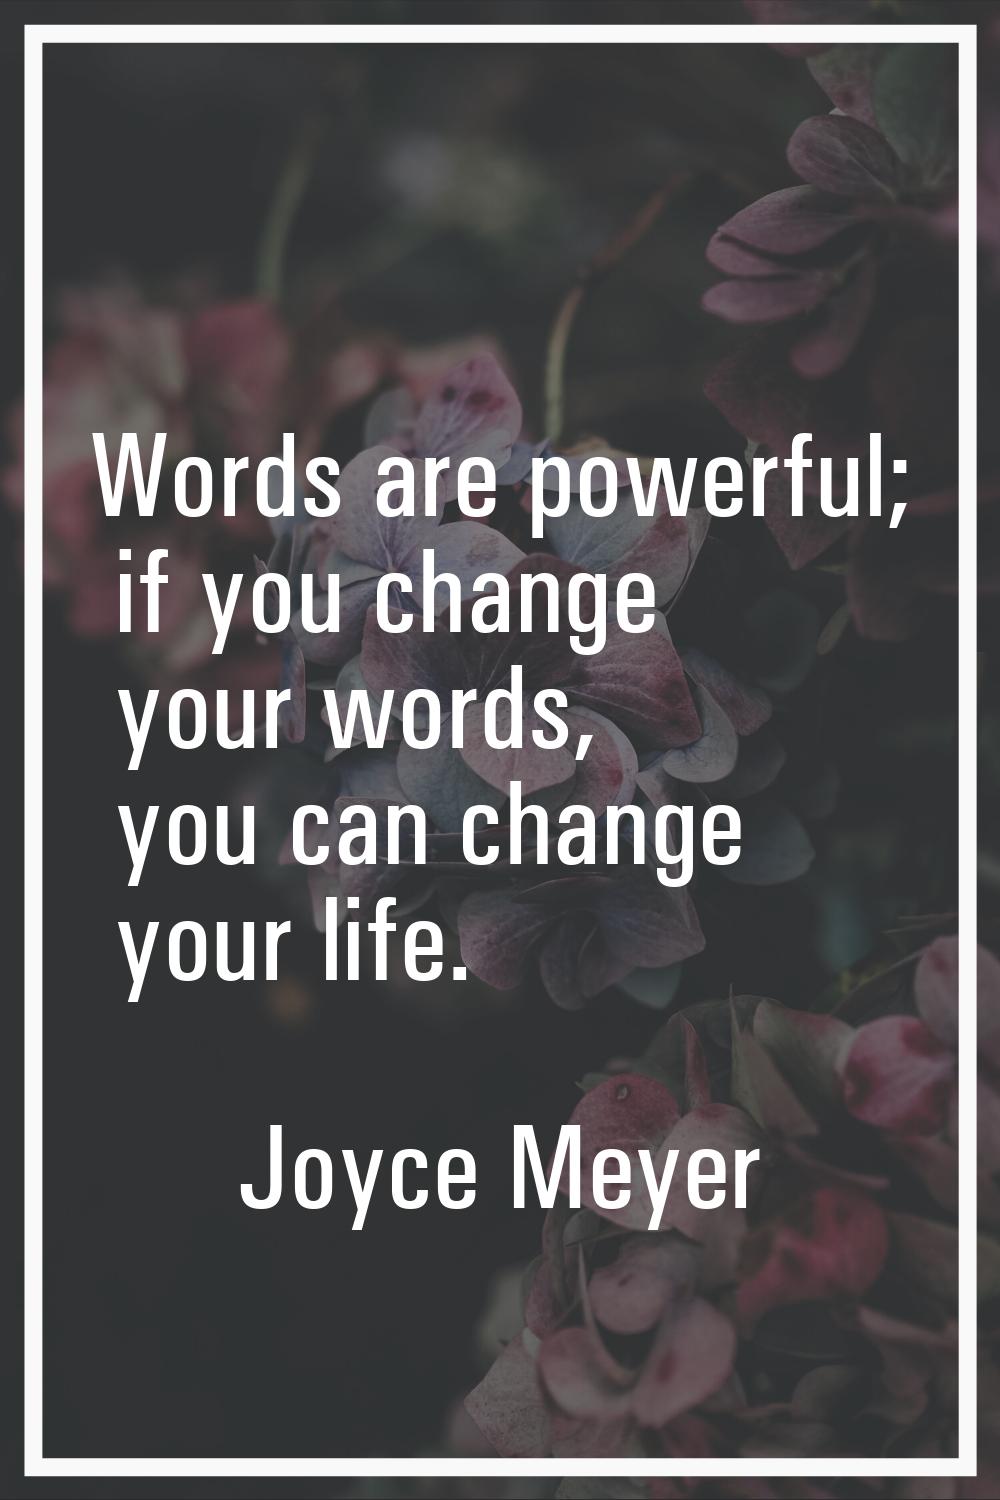 Words are powerful; if you change your words, you can change your life.